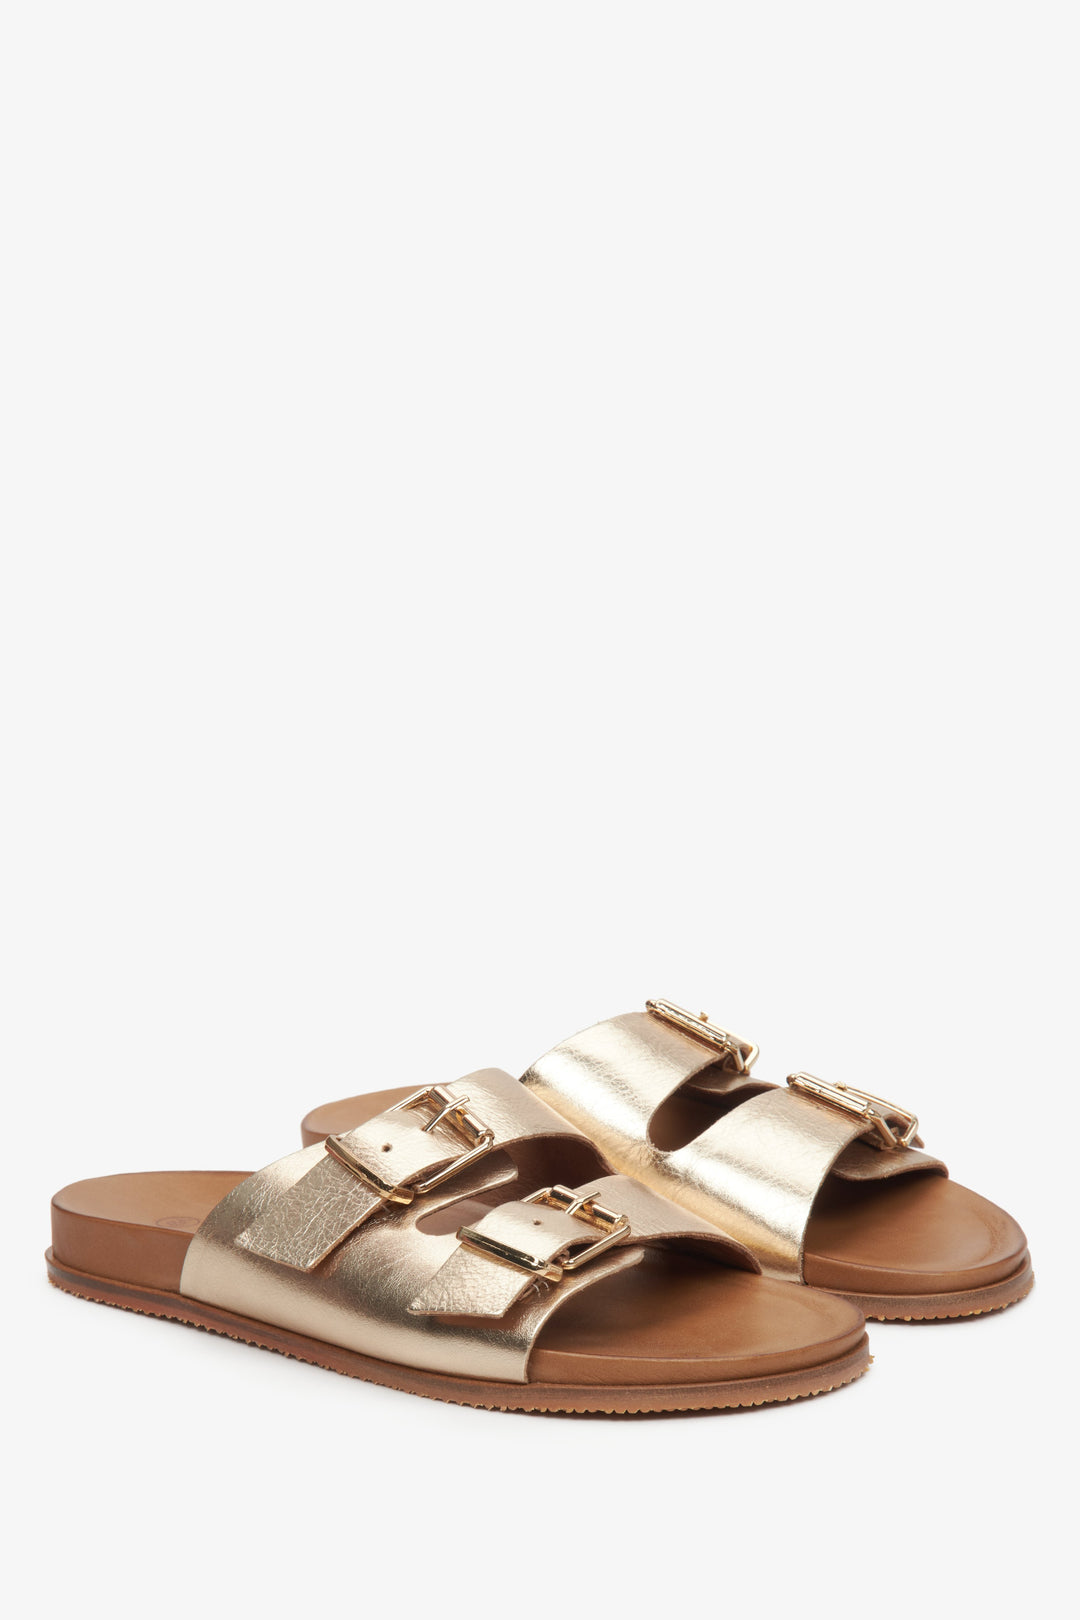 Women's slide sandals in gold color Estro made of natural leather.